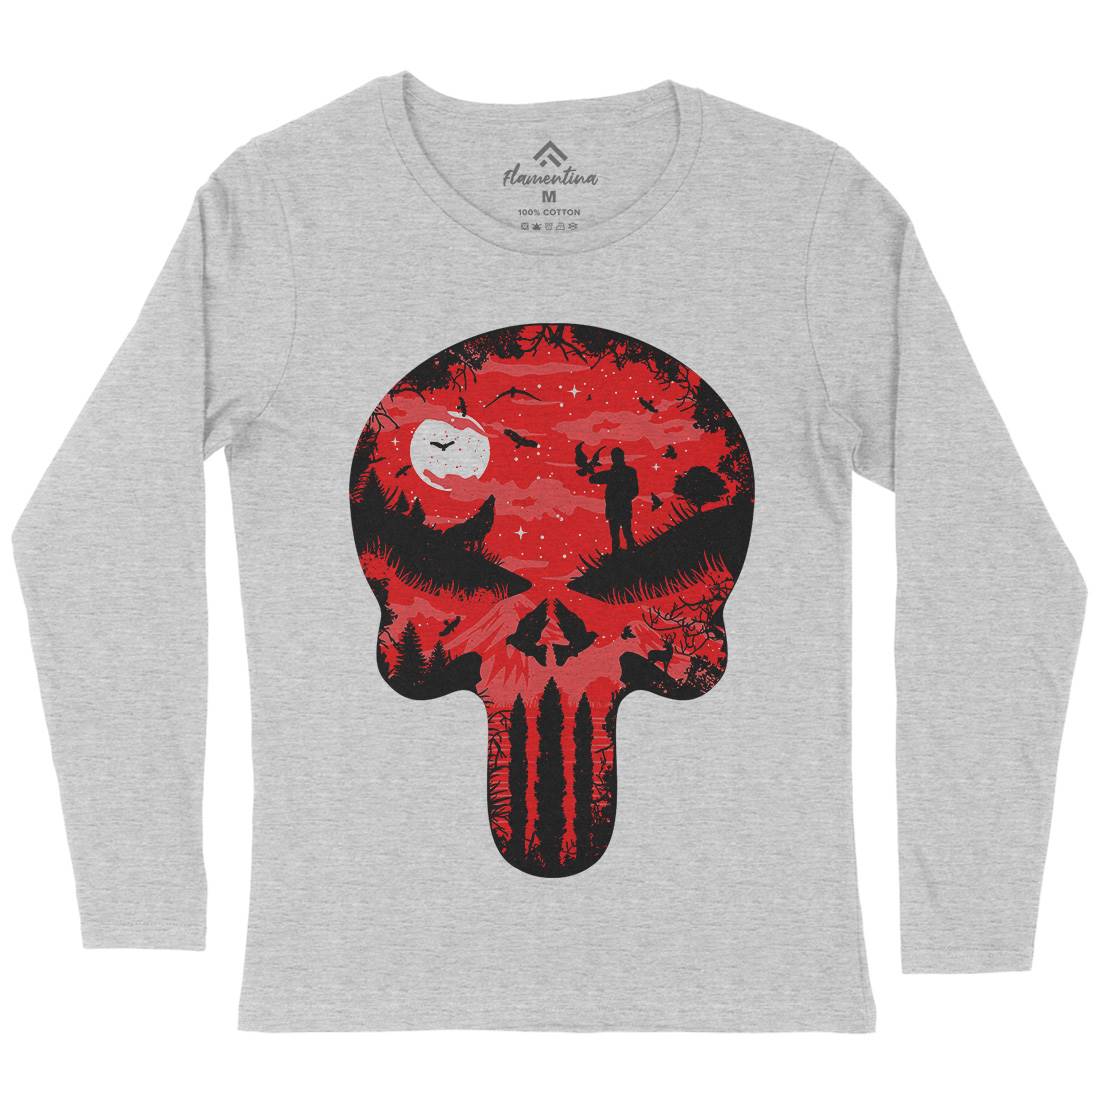 Stand And Bleed Womens Long Sleeve T-Shirt Horror B085